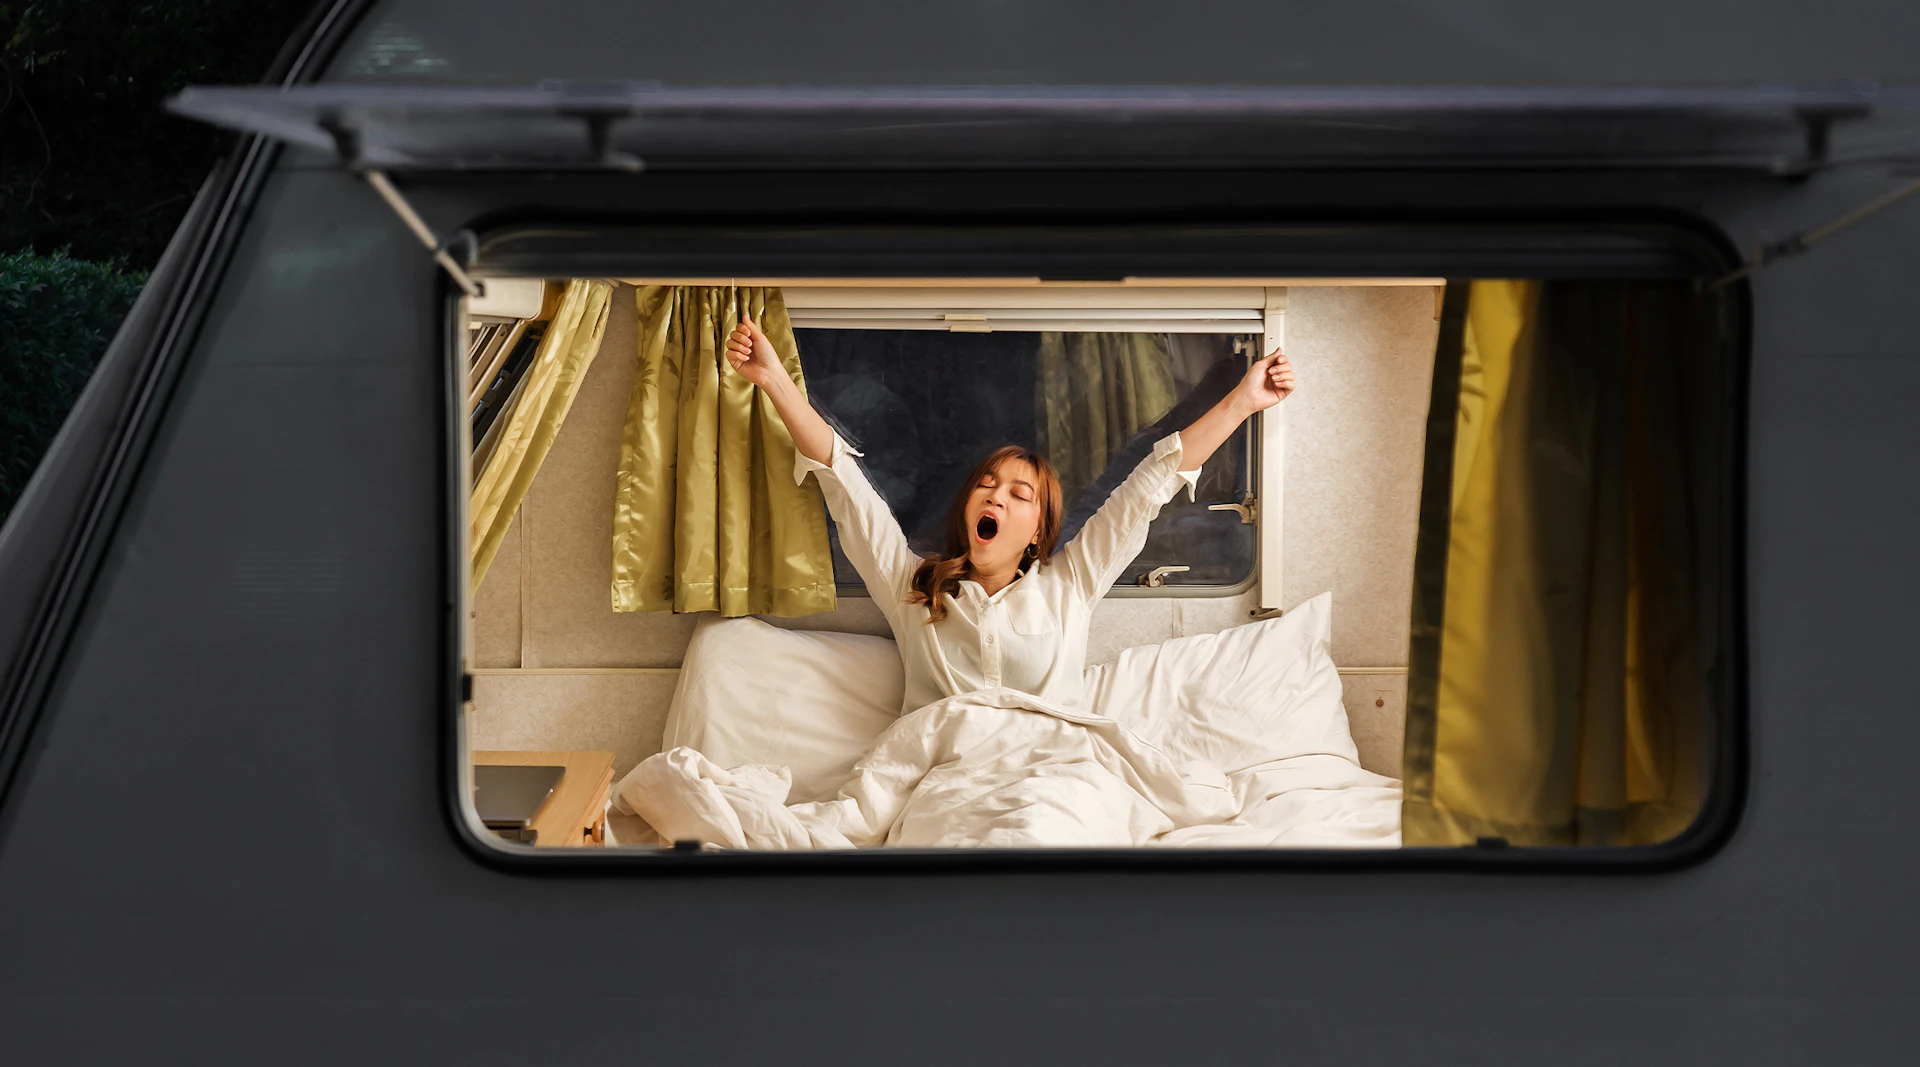 A woman gets ready for bed in her RV.